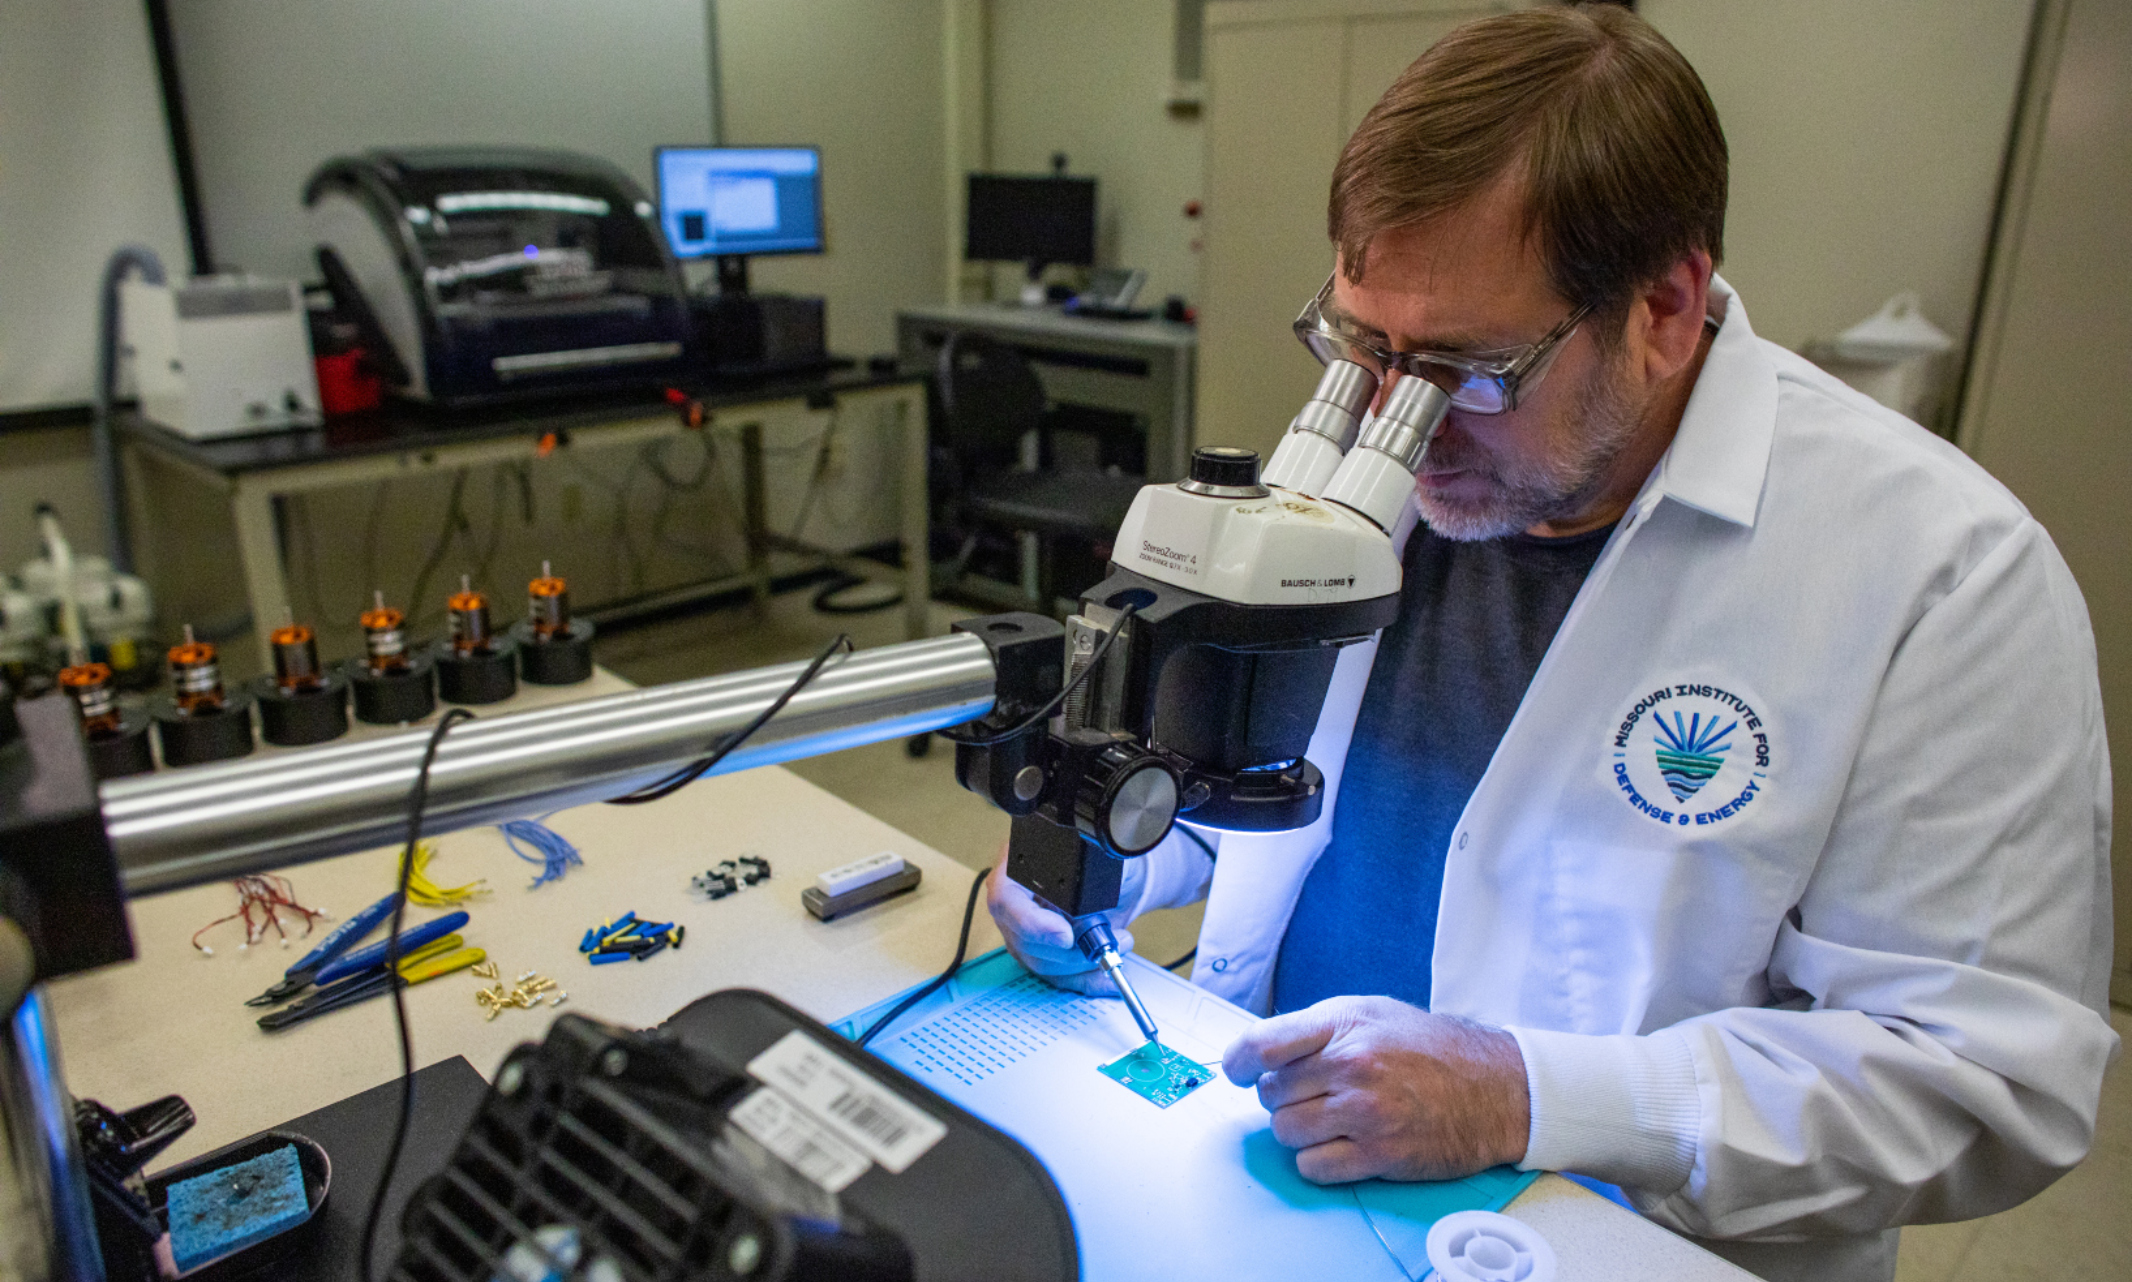 Scientist in UMKC lab working on microelectronic components